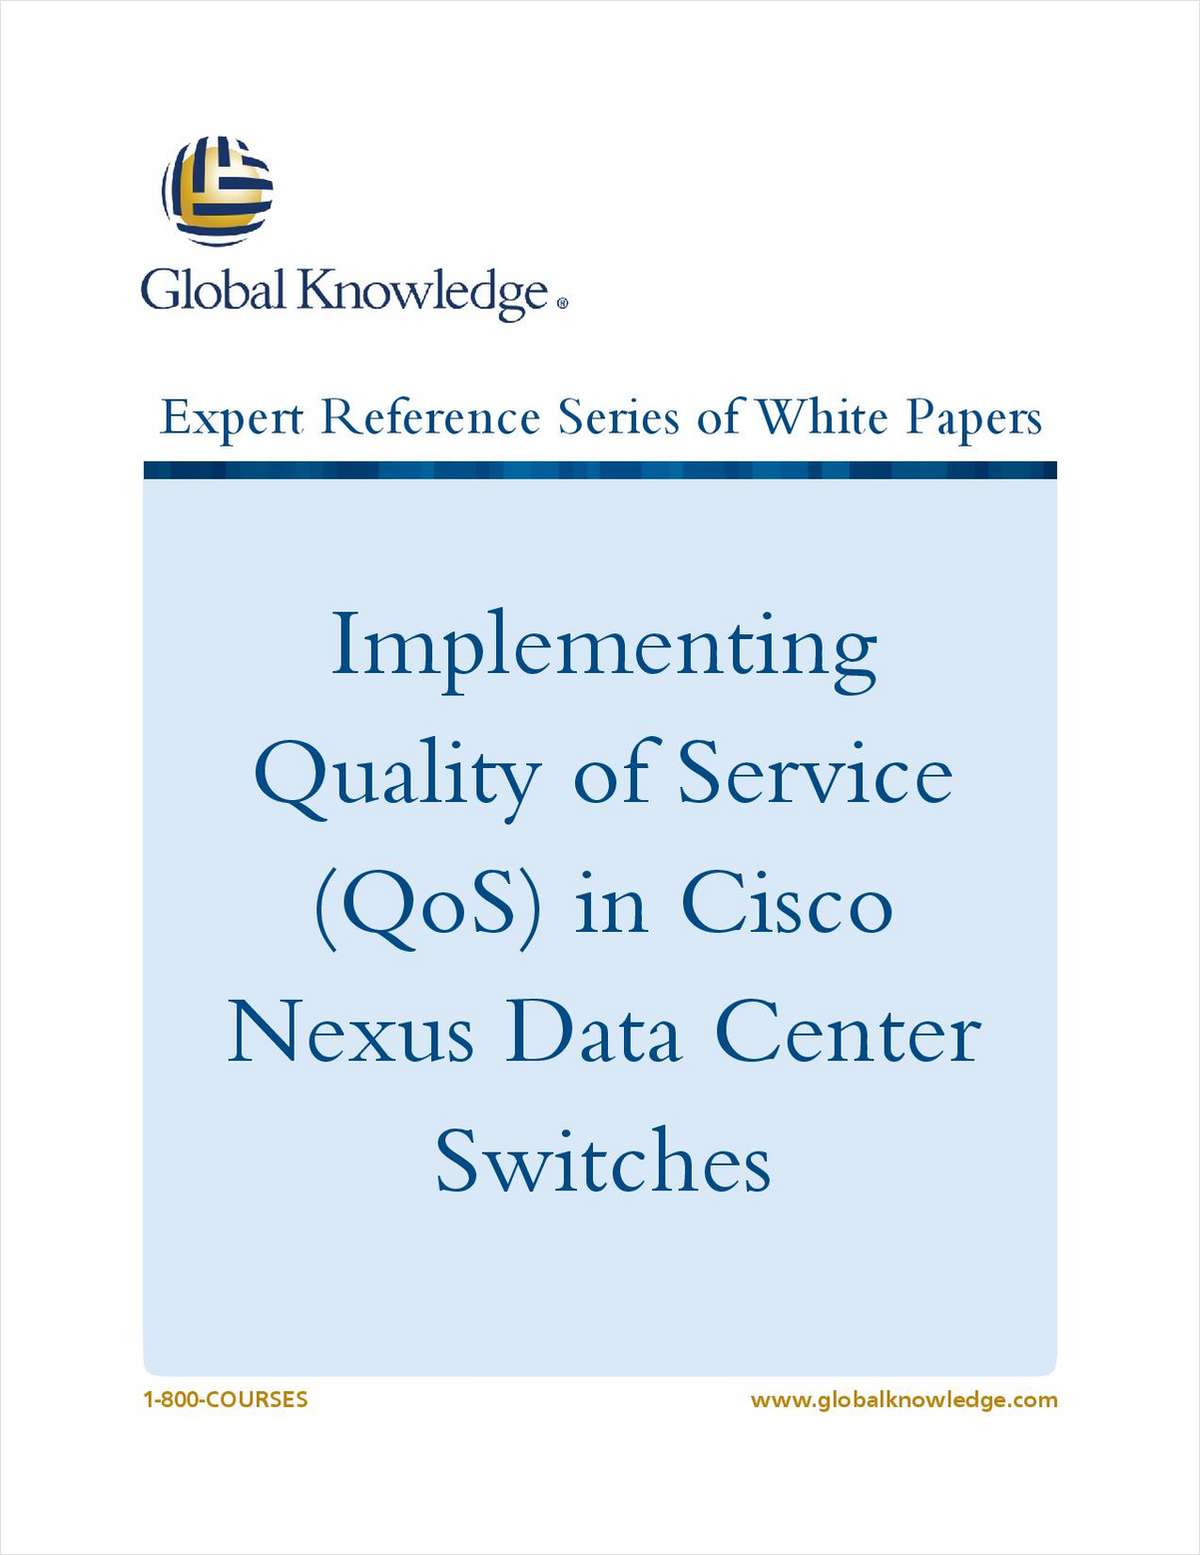 Implementing Quality of Service (QoS) in Cisco Nexus Data Center Switches